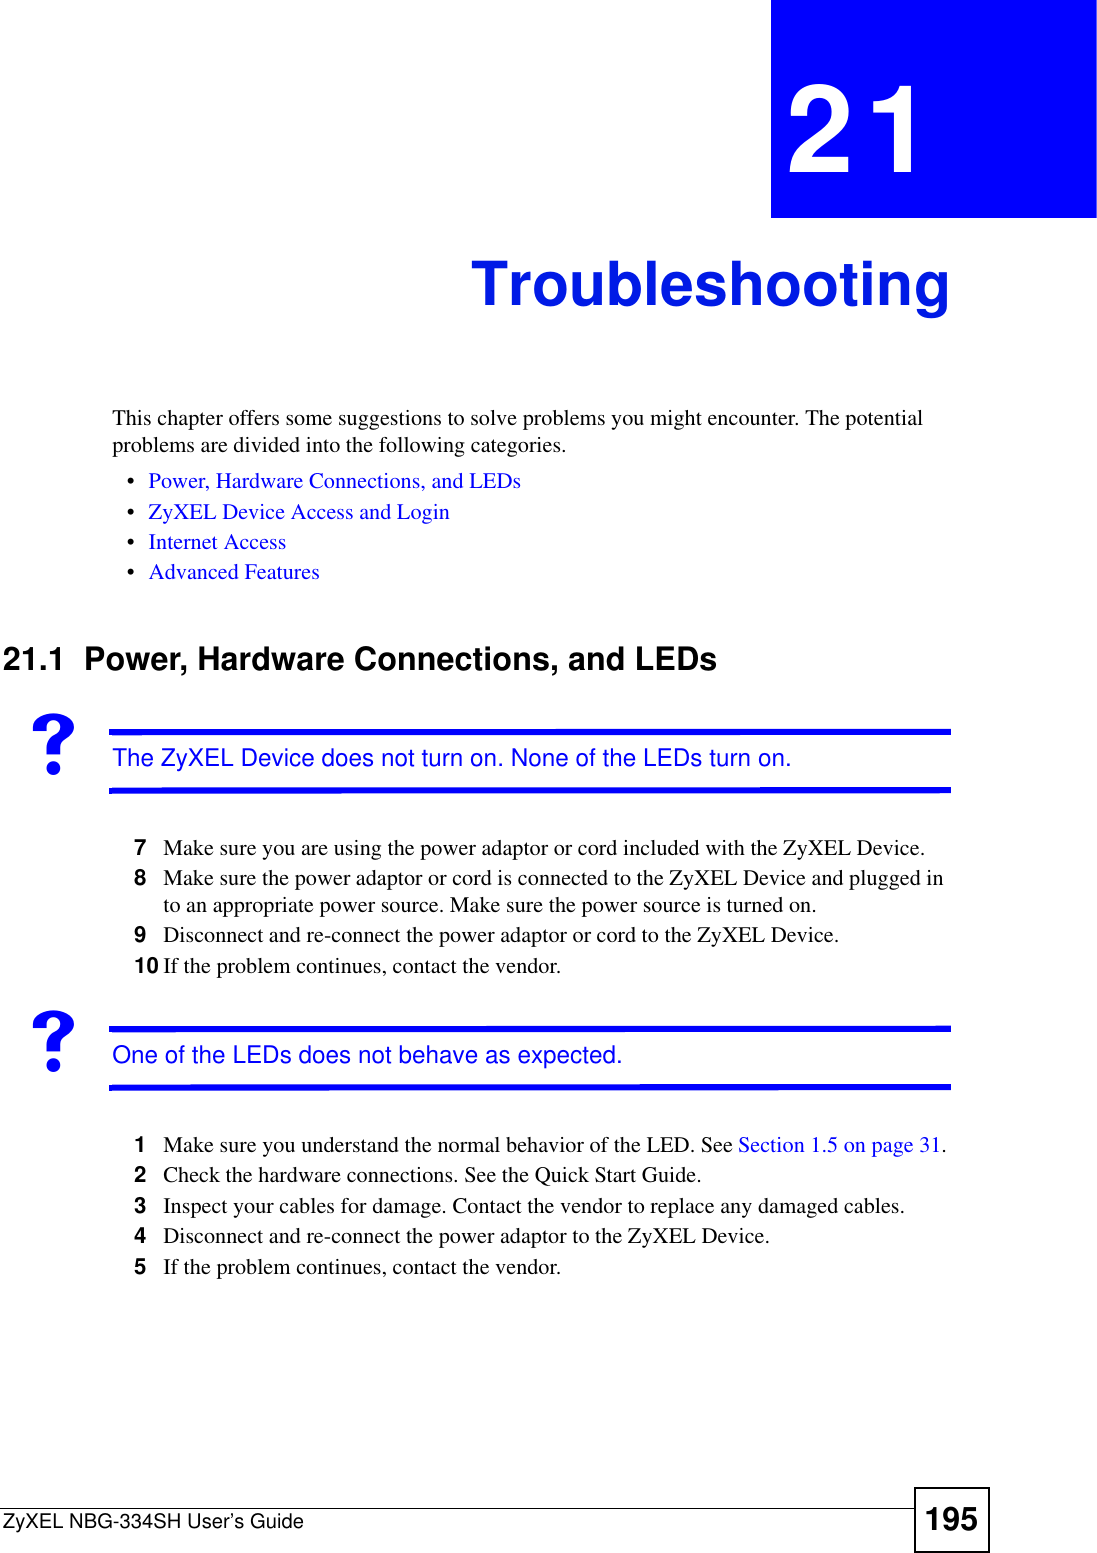 ZyXEL NBG-334SH User’s Guide 195CHAPTER 21TroubleshootingThis chapter offers some suggestions to solve problems you might encounter. The potential problems are divided into the following categories. •Power, Hardware Connections, and LEDs•ZyXEL Device Access and Login•Internet Access•Advanced Features21.1  Power, Hardware Connections, and LEDsVThe ZyXEL Device does not turn on. None of the LEDs turn on.7Make sure you are using the power adaptor or cord included with the ZyXEL Device.8Make sure the power adaptor or cord is connected to the ZyXEL Device and plugged in to an appropriate power source. Make sure the power source is turned on.9Disconnect and re-connect the power adaptor or cord to the ZyXEL Device. 10 If the problem continues, contact the vendor.VOne of the LEDs does not behave as expected.1Make sure you understand the normal behavior of the LED. See Section 1.5 on page 31.2Check the hardware connections. See the Quick Start Guide. 3Inspect your cables for damage. Contact the vendor to replace any damaged cables.4Disconnect and re-connect the power adaptor to the ZyXEL Device. 5If the problem continues, contact the vendor.